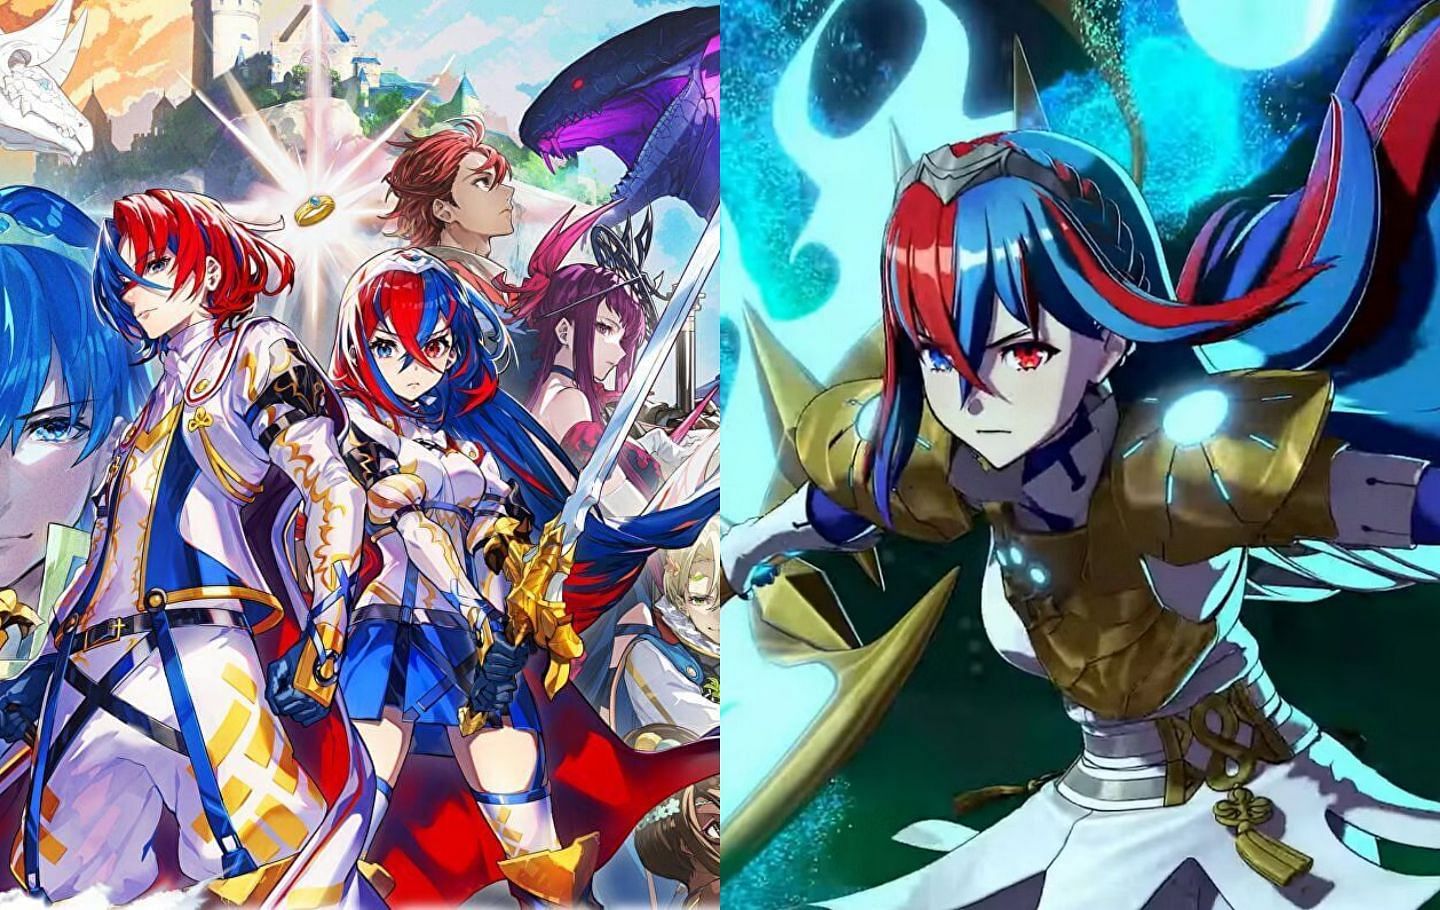 Character progression is a key element in Fire Emblem Engage (Images via Nintendo)